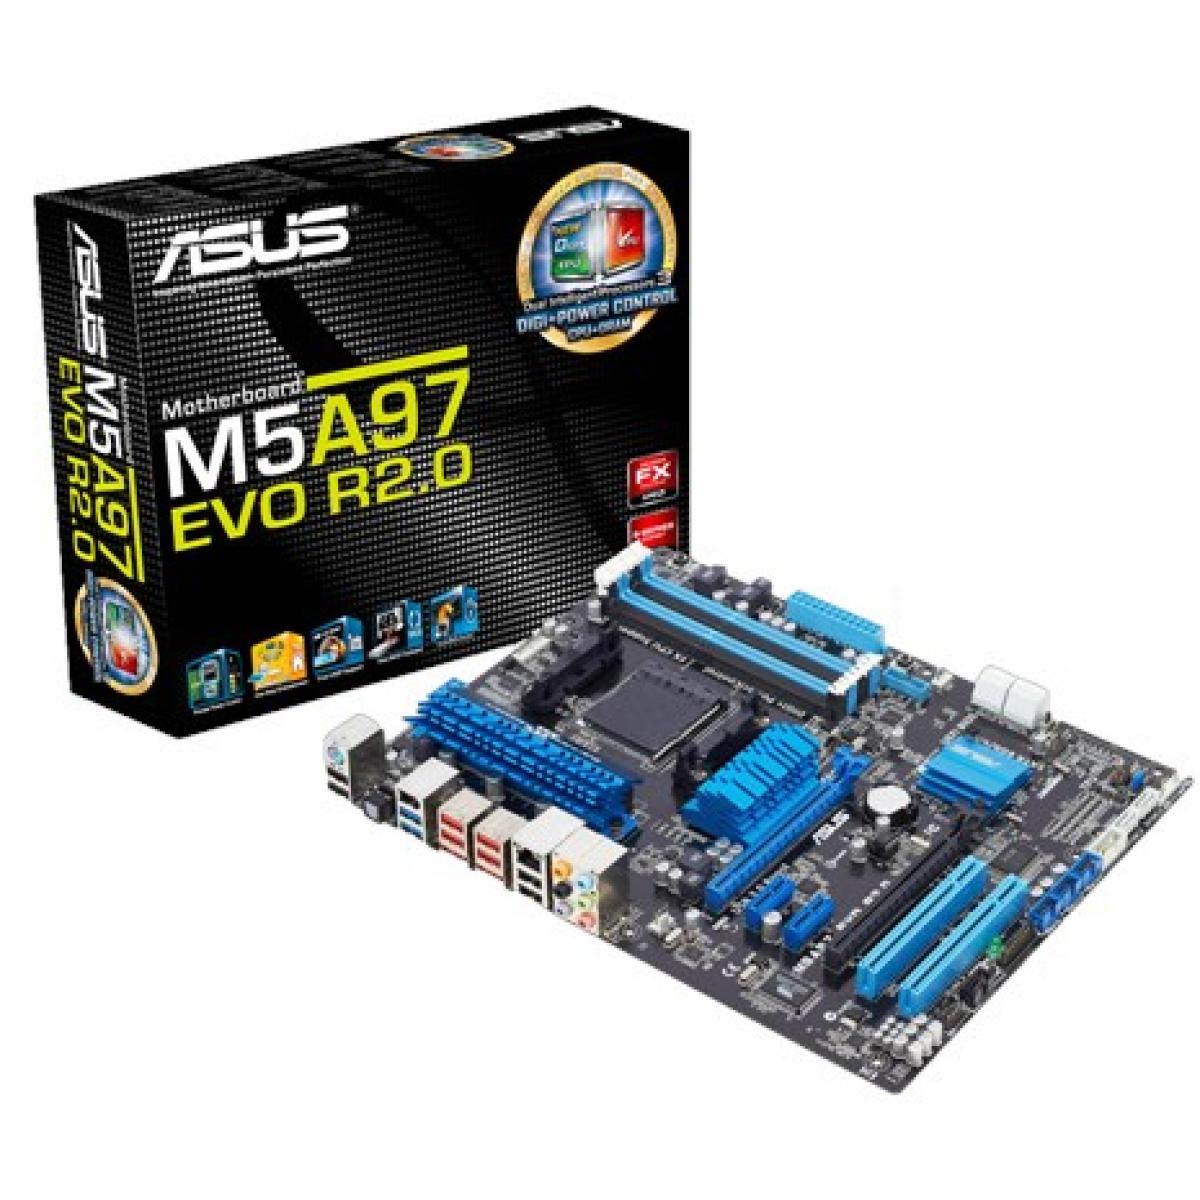 asus m5a97 le r2.0 motherboard